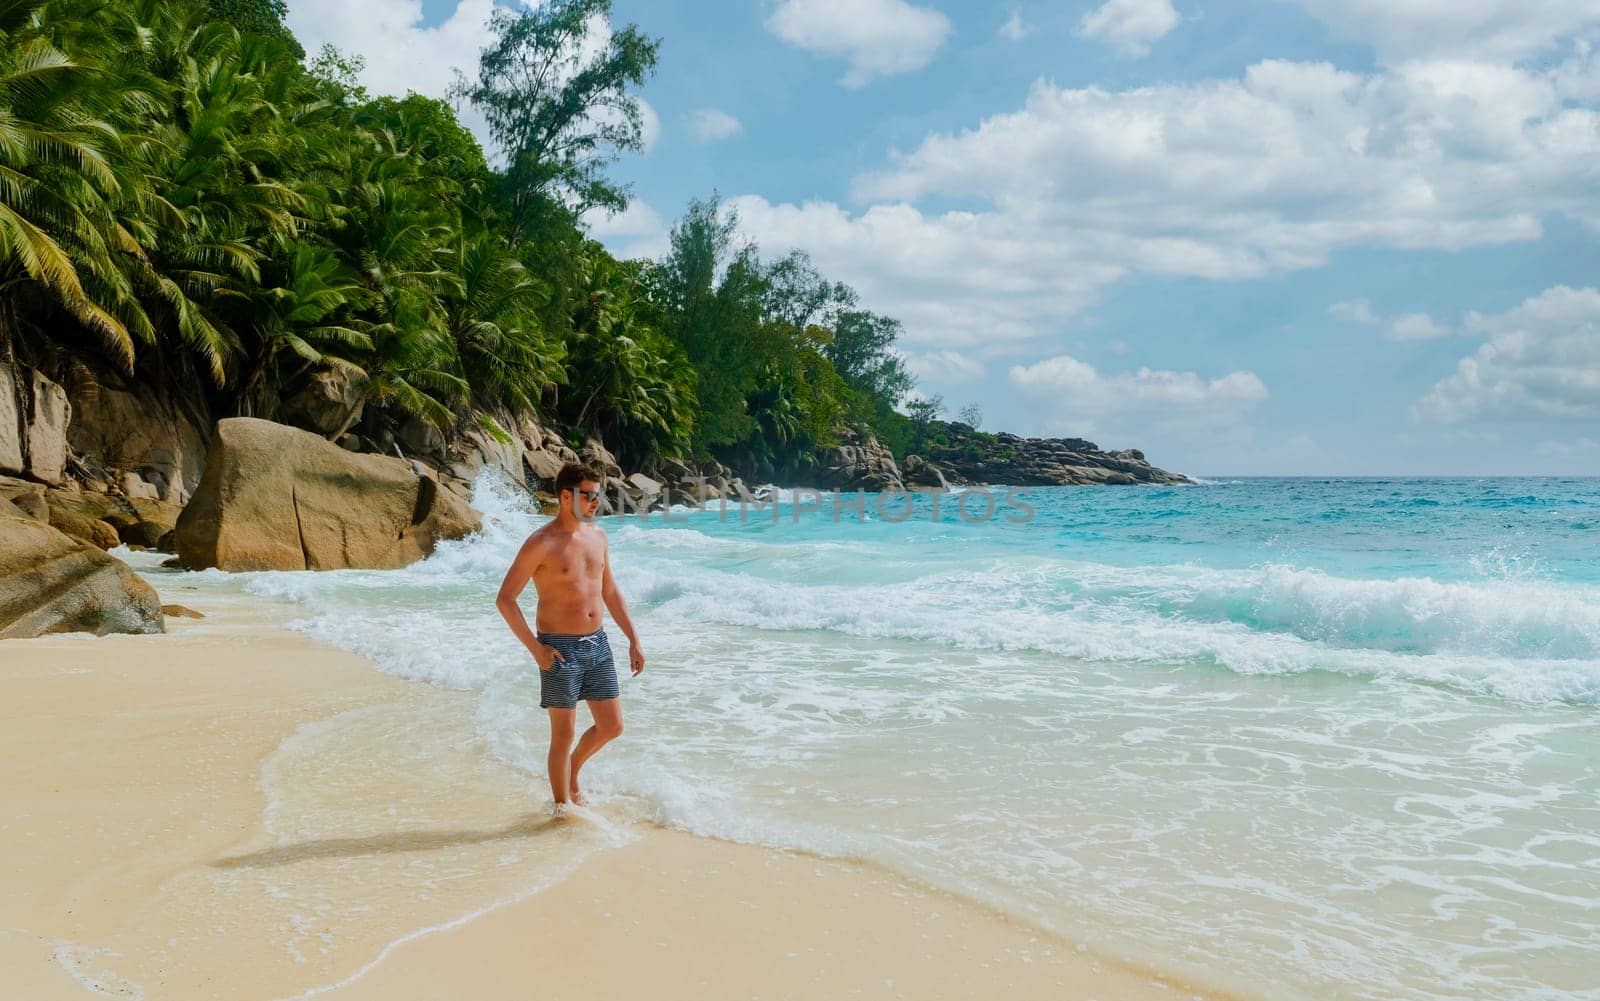 Young men in a swim short on a white tropical beach with palm trees Petite Anse beach Mahe Tropical Seychelles Islands.